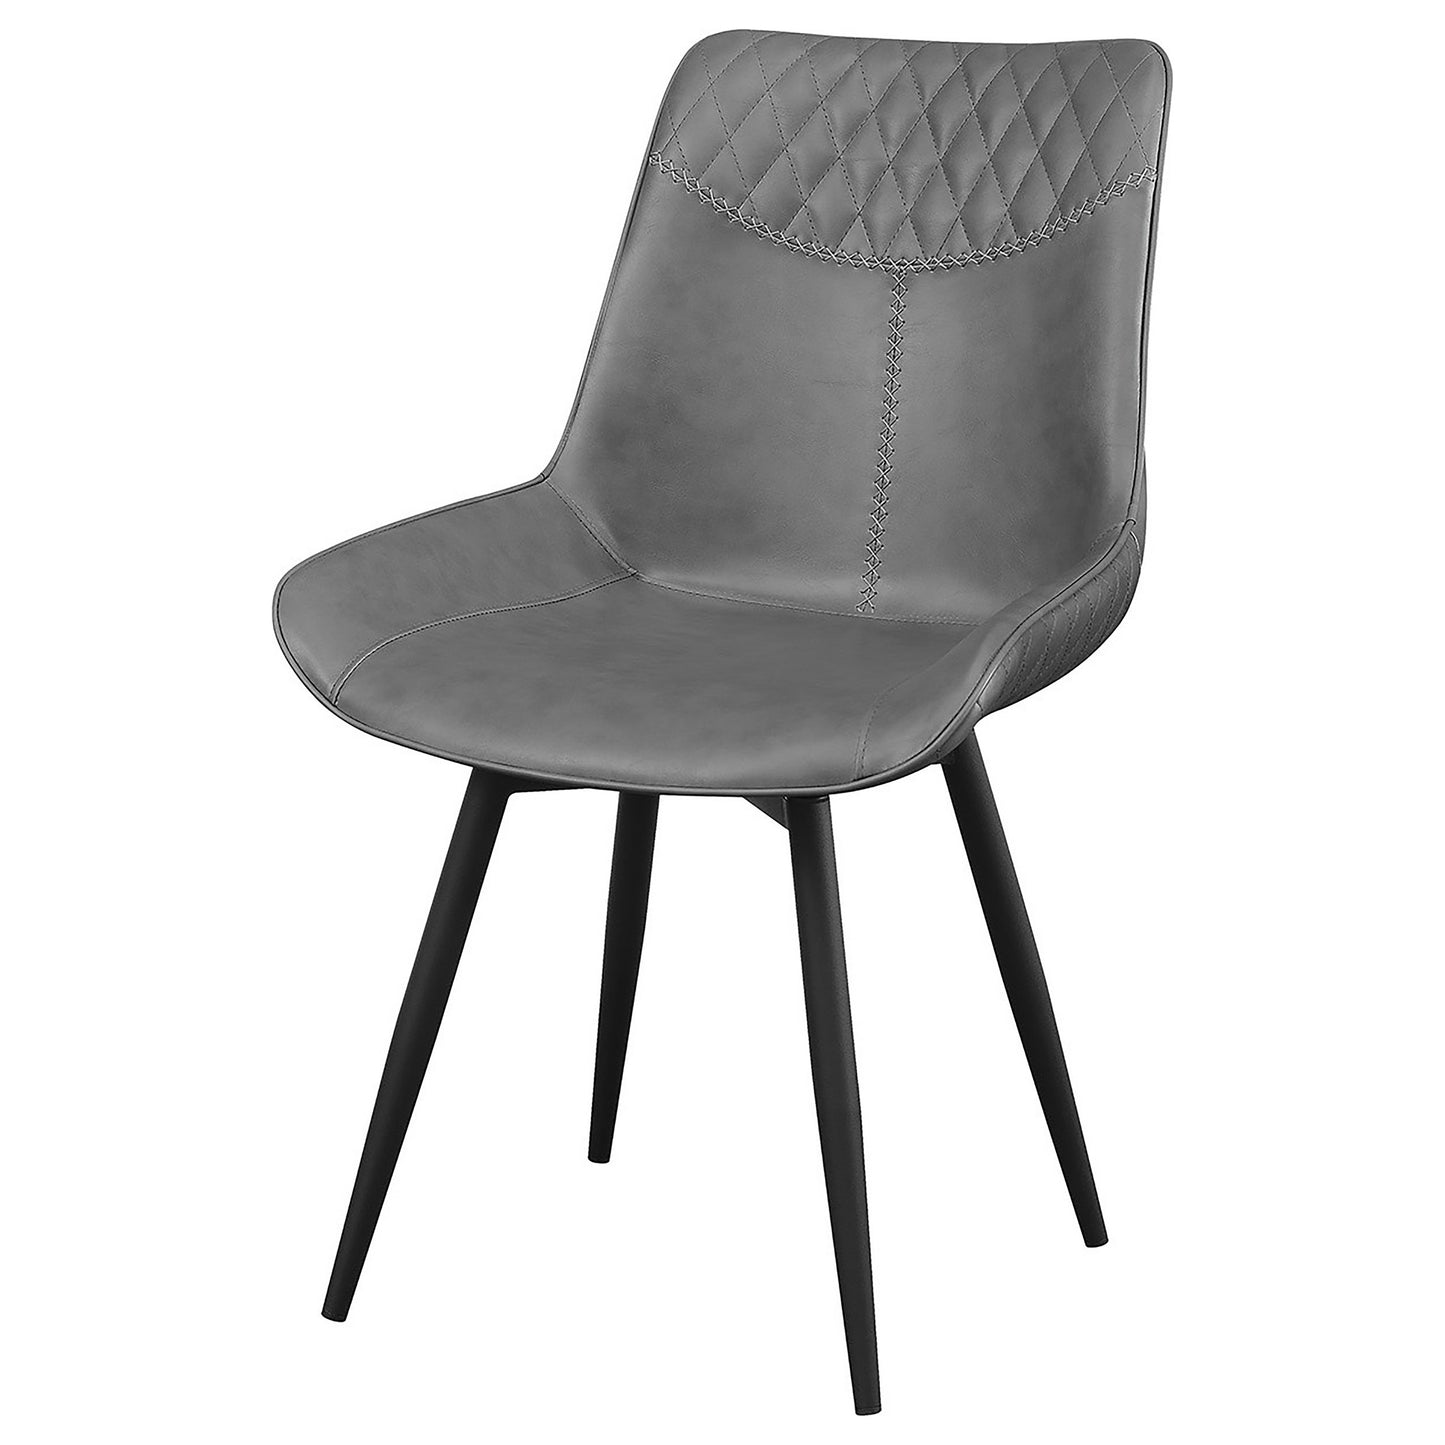 Brassie Upholstered Side Chairs Grey (Set of 2)